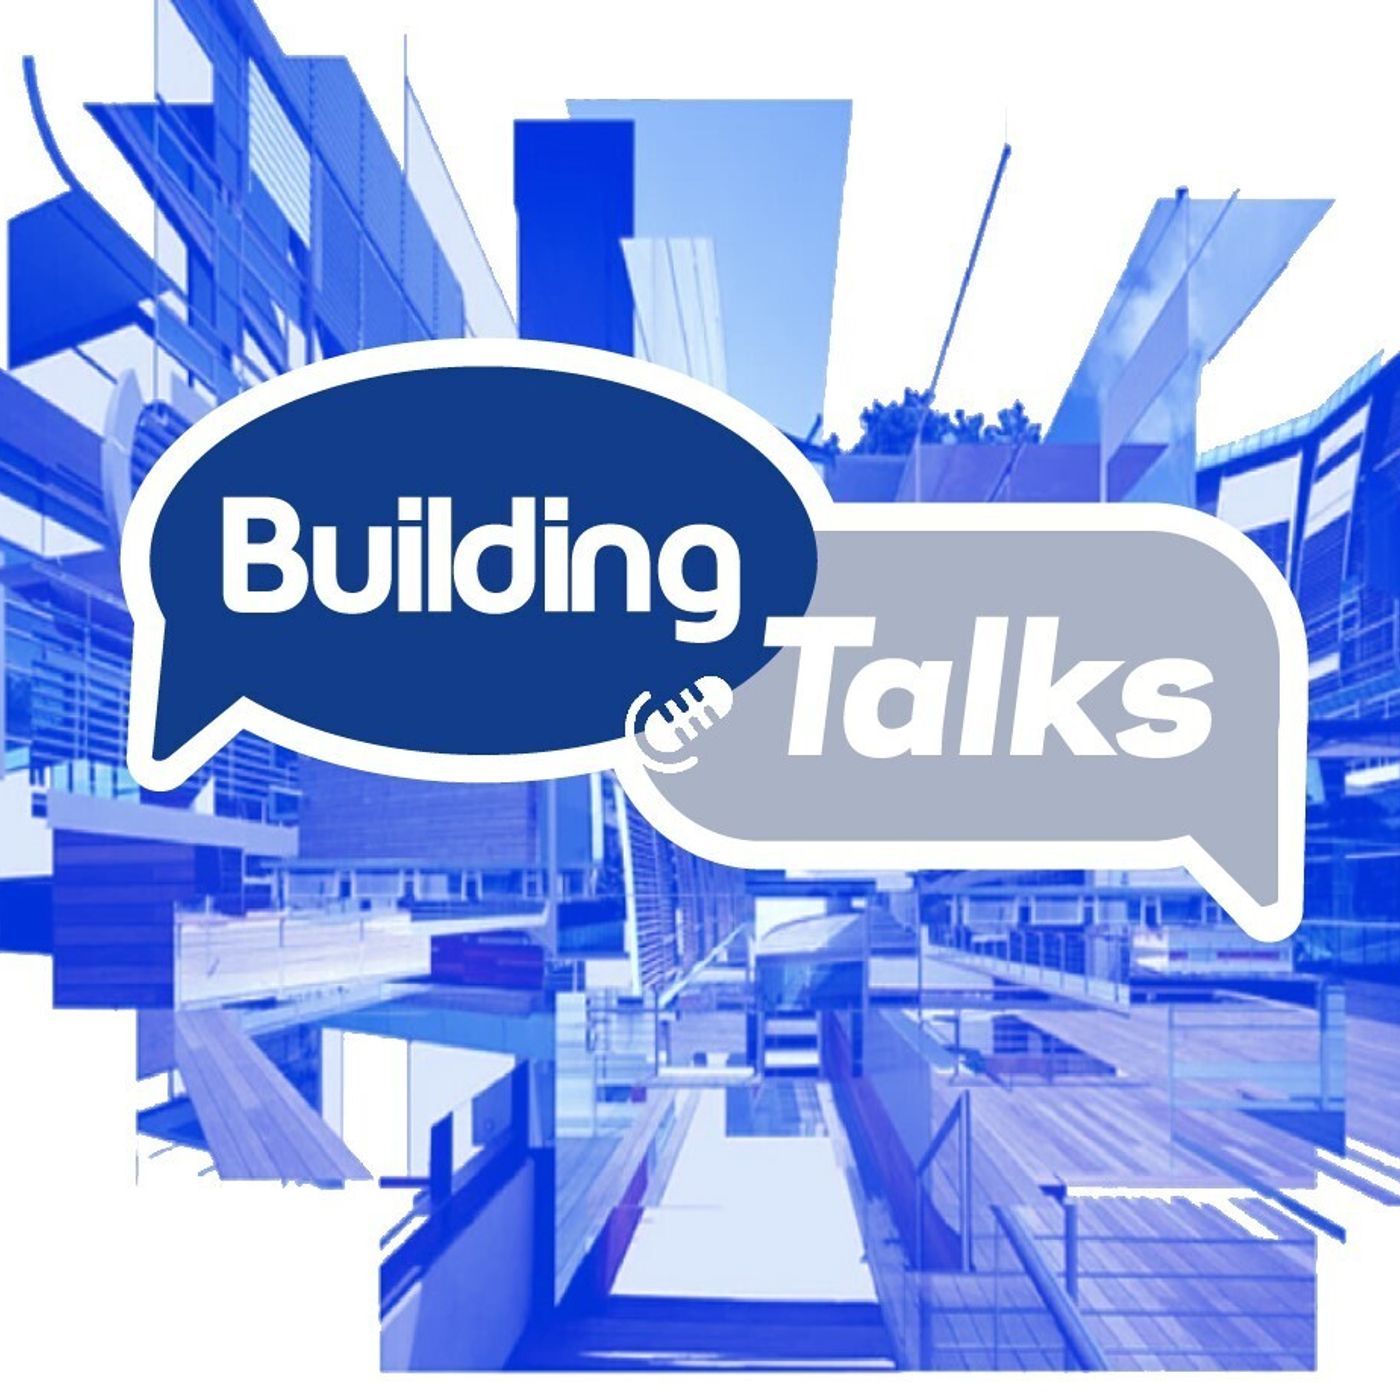 S1 Ep1: Building Talks… Net Zero - Episode 1: An interview with RIBA president Simon Allford and jargon busting with Cundall’s Simon Wyatt